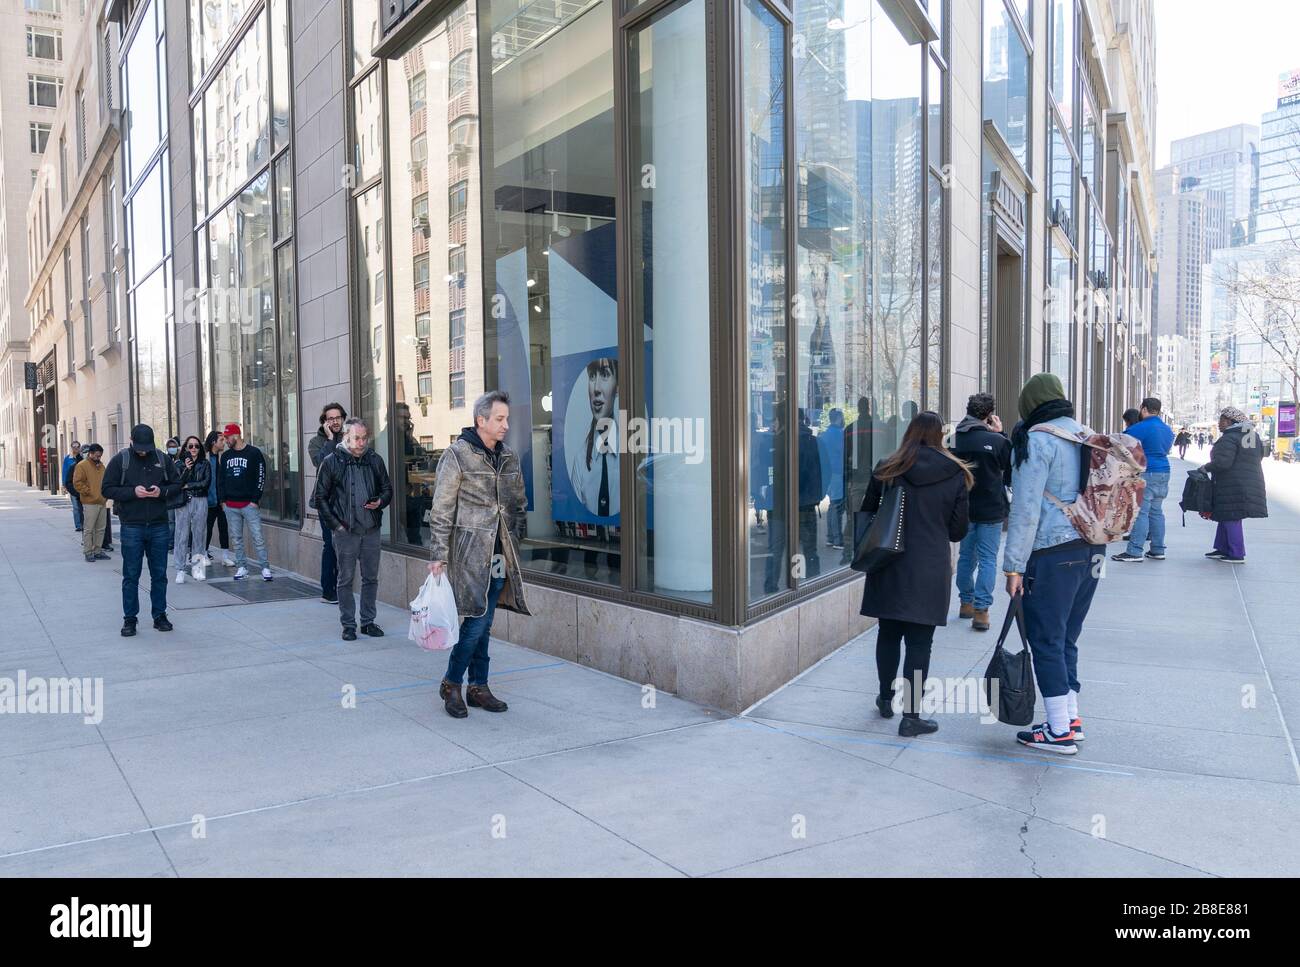 New York, NY - March 21, 2020: Customers maintain social distances of 6 feet at Best Buy electronic store on Broadway Stock Photo